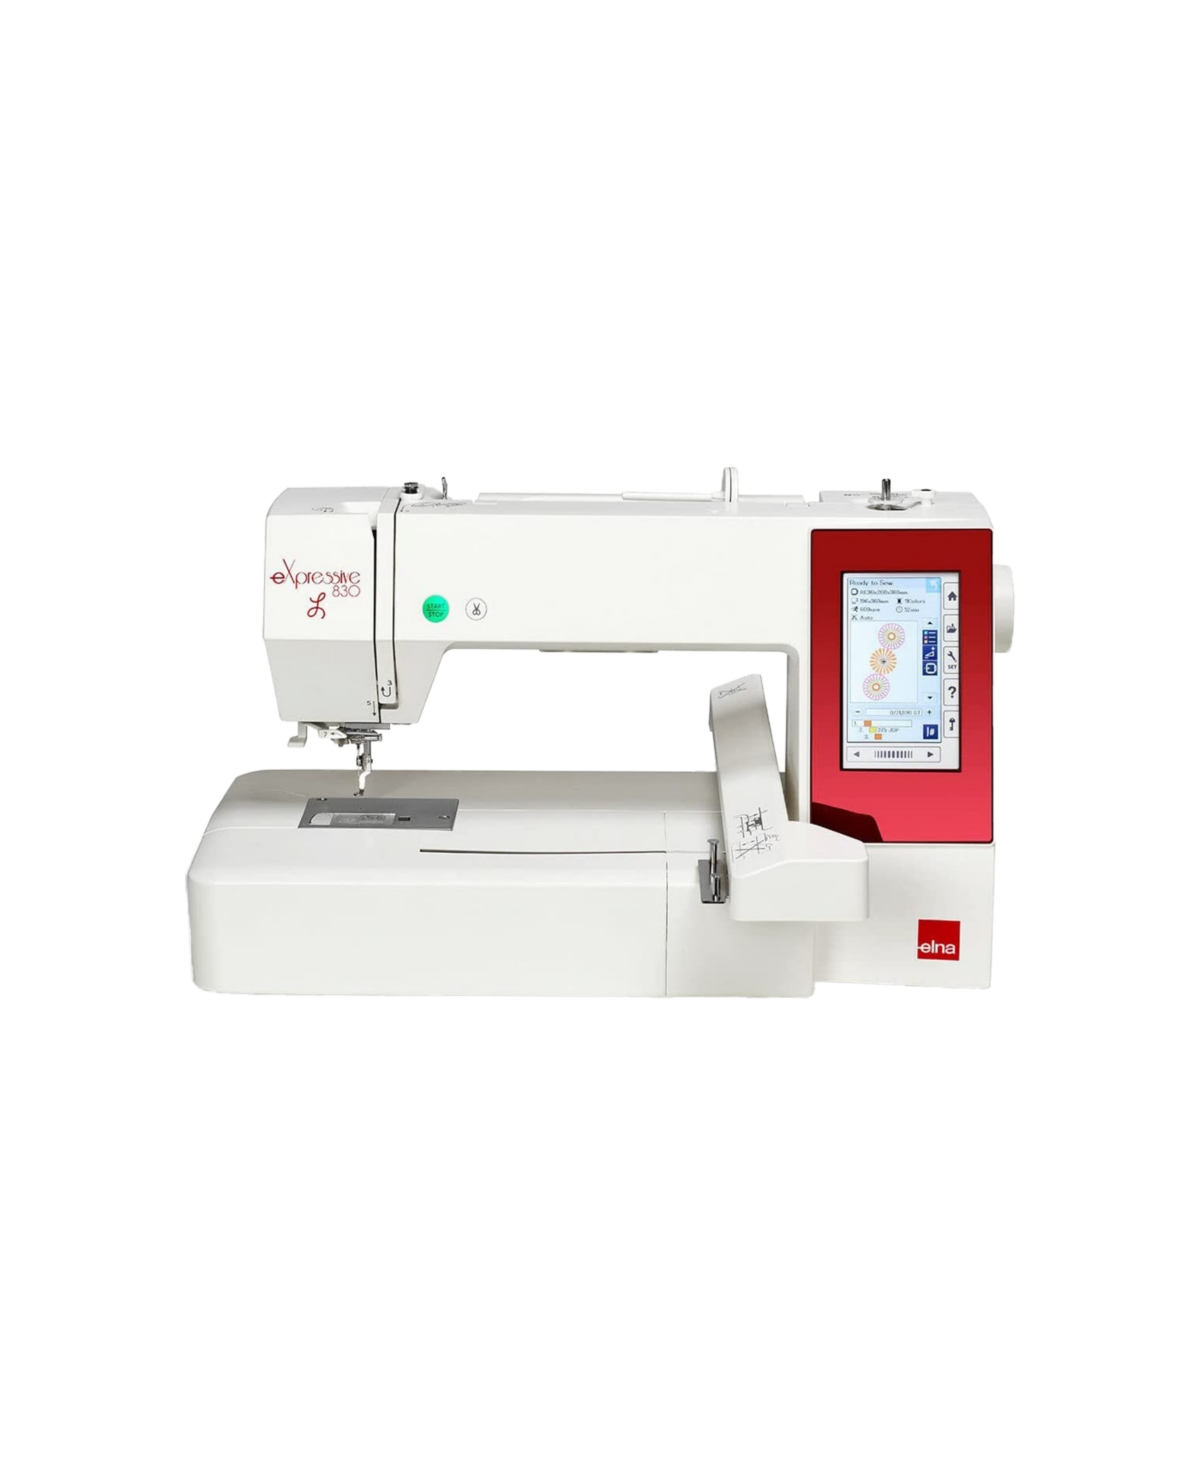 eXpressive 830L Sewing and Embroidery Machine - White